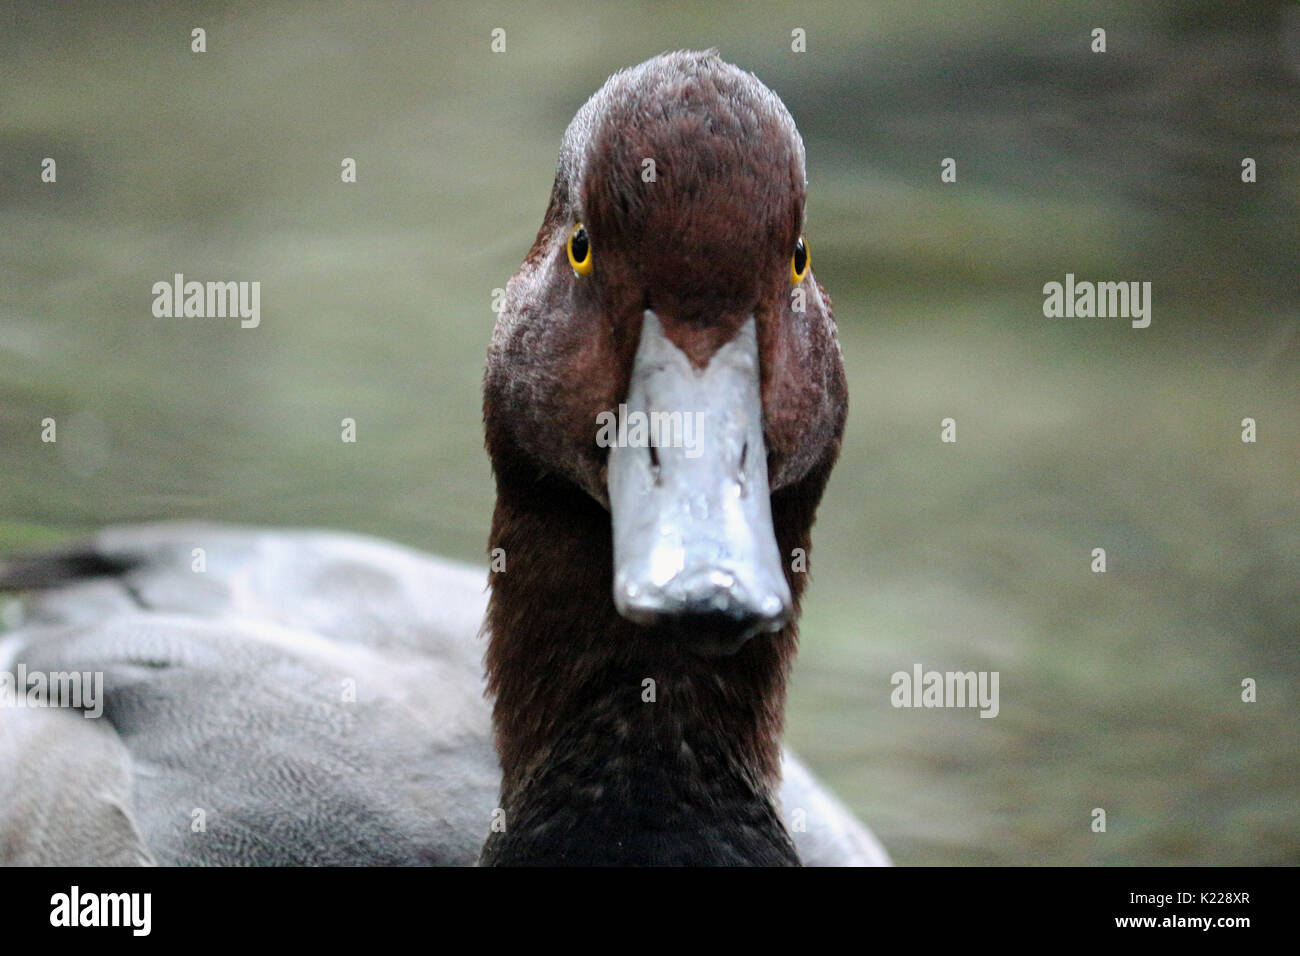 A Dark Brown Duck Wading In the Shallow Fresh Water. Stock Photo